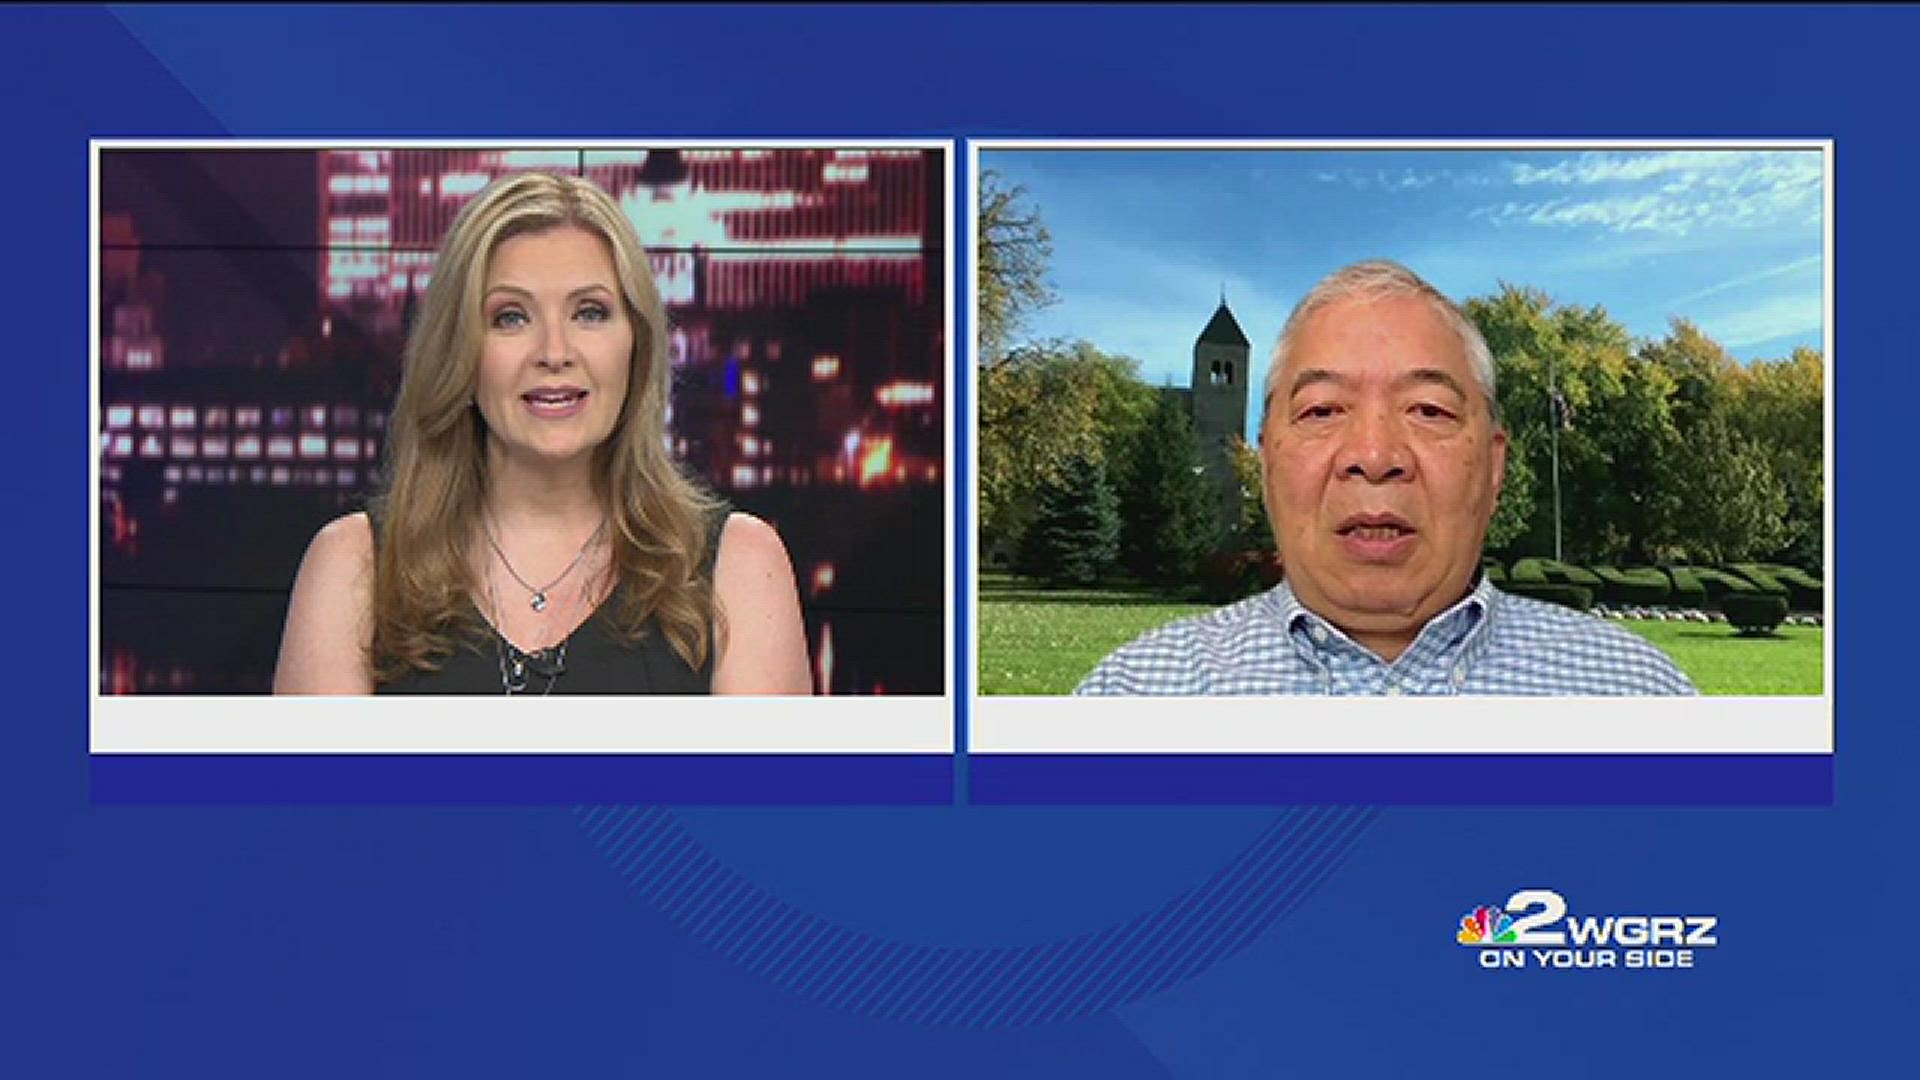 Dr. Tenpao Lee, an economist and professor emeritus at Niagara University, discusses what the U.S. government's rate hike mean for the average American.